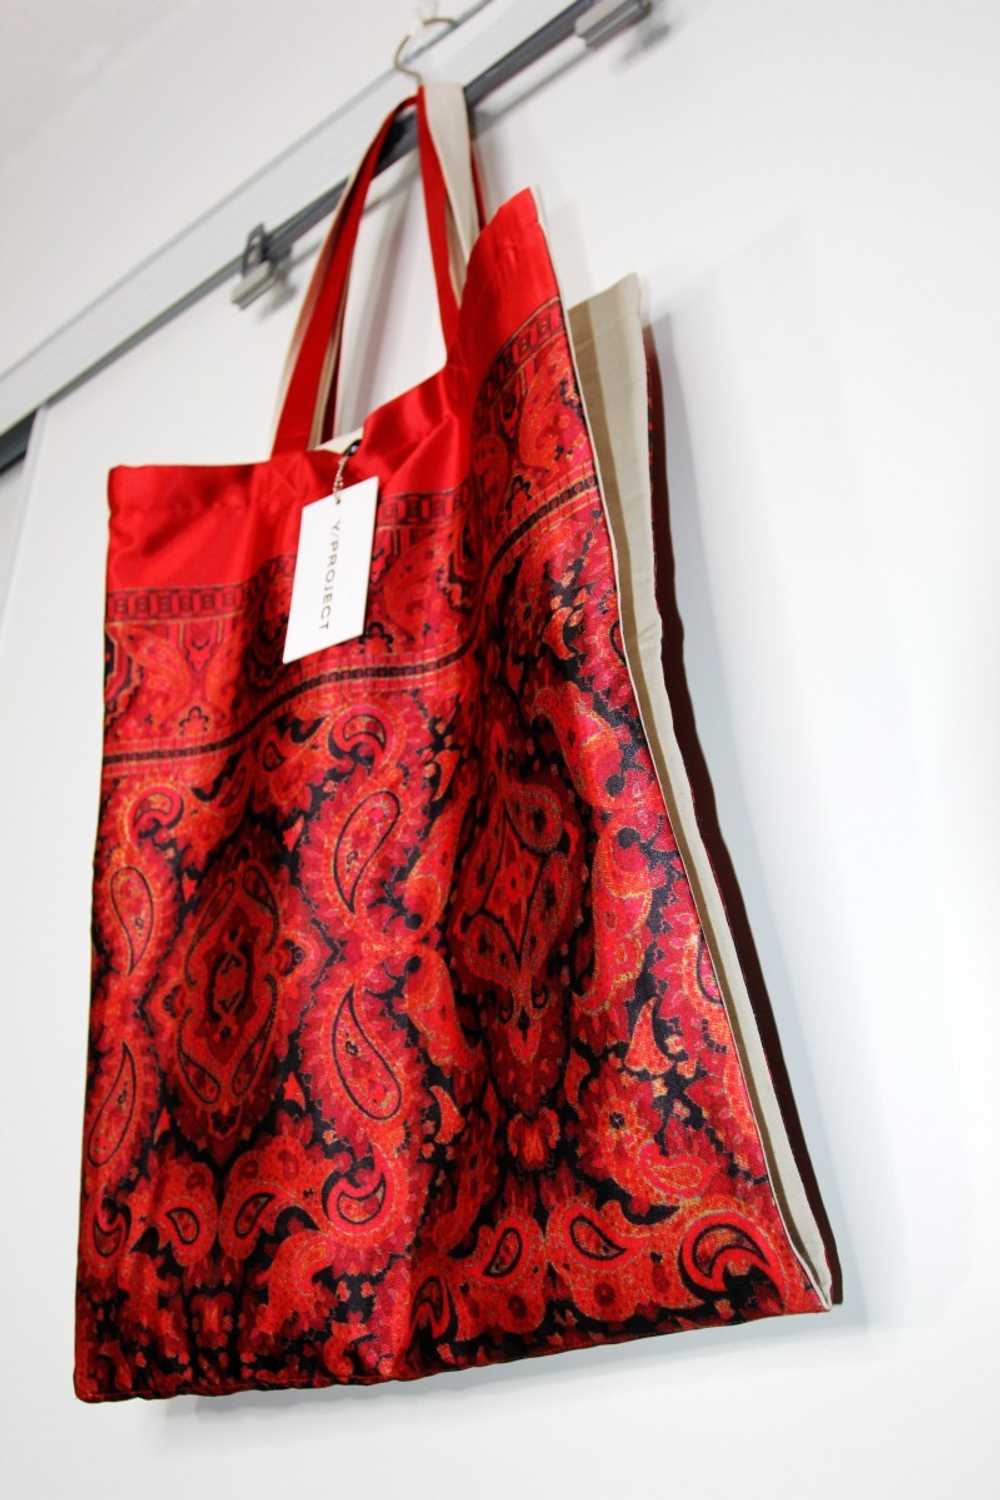 BNWT AW20 Y/PROJECT SCARF TOTE BAG - image 4